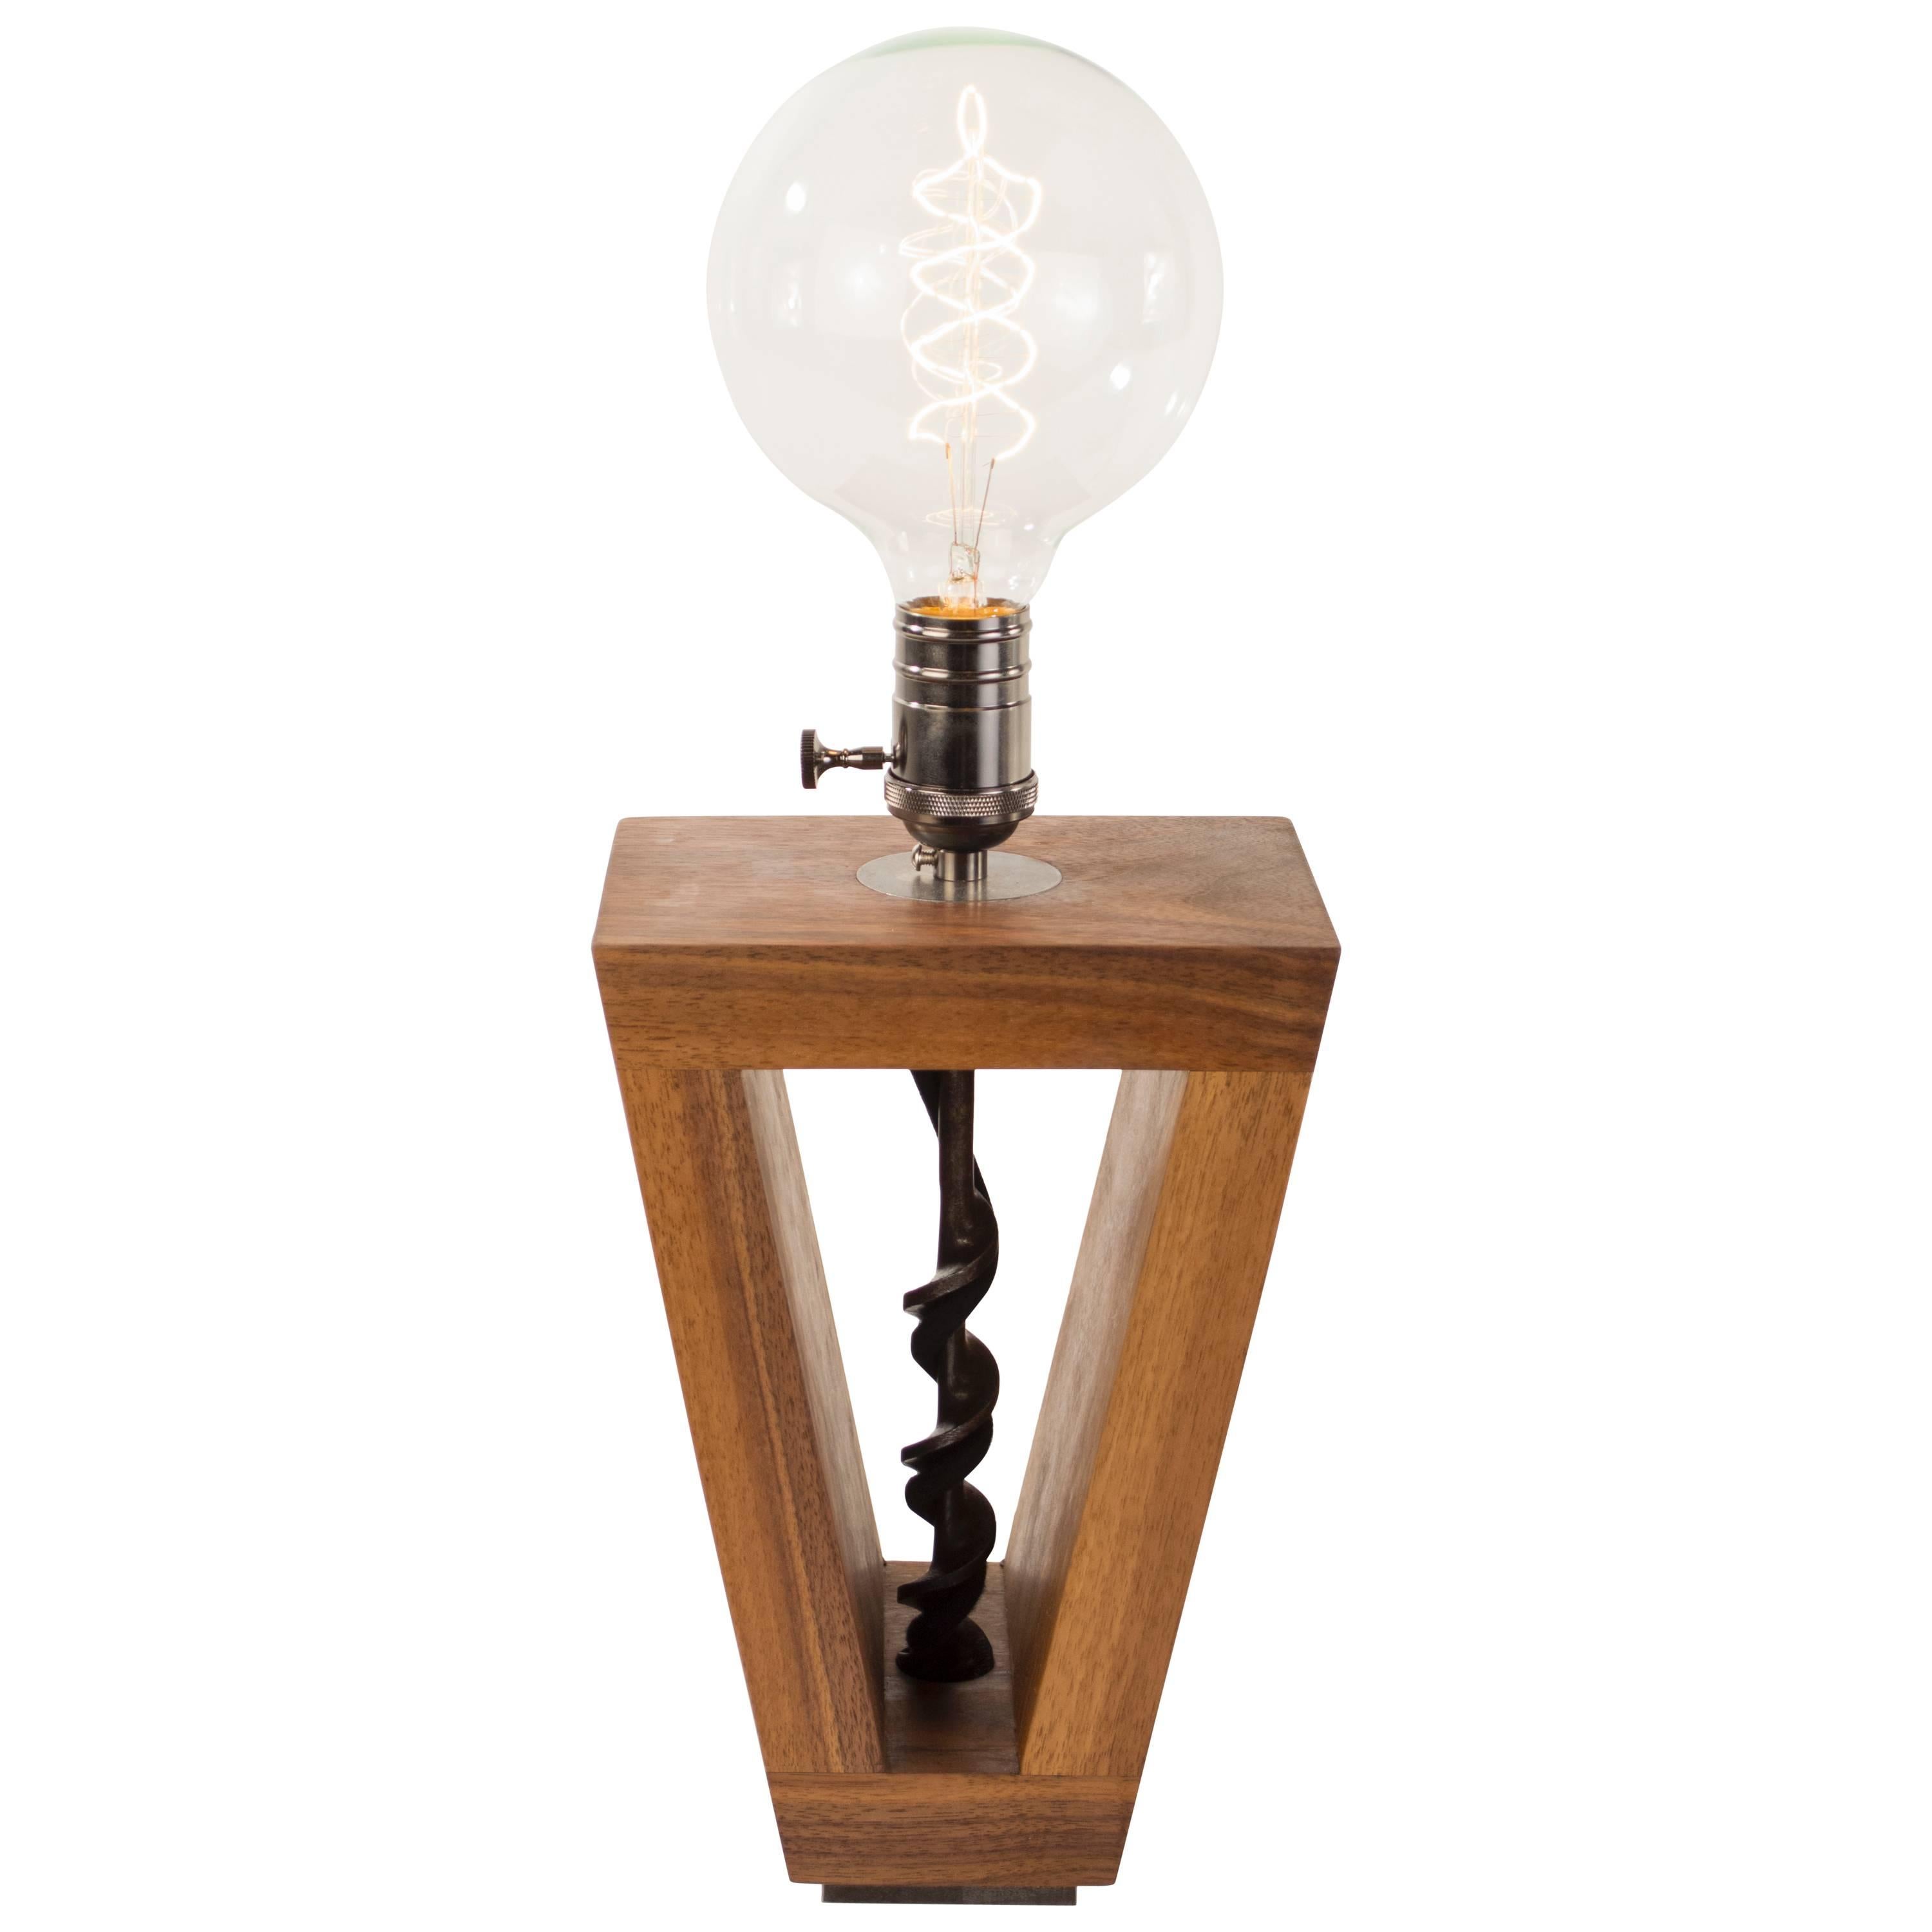 BITS Series No. 3 Table Lamp : walnut and antique drill bit, handmade to order For Sale